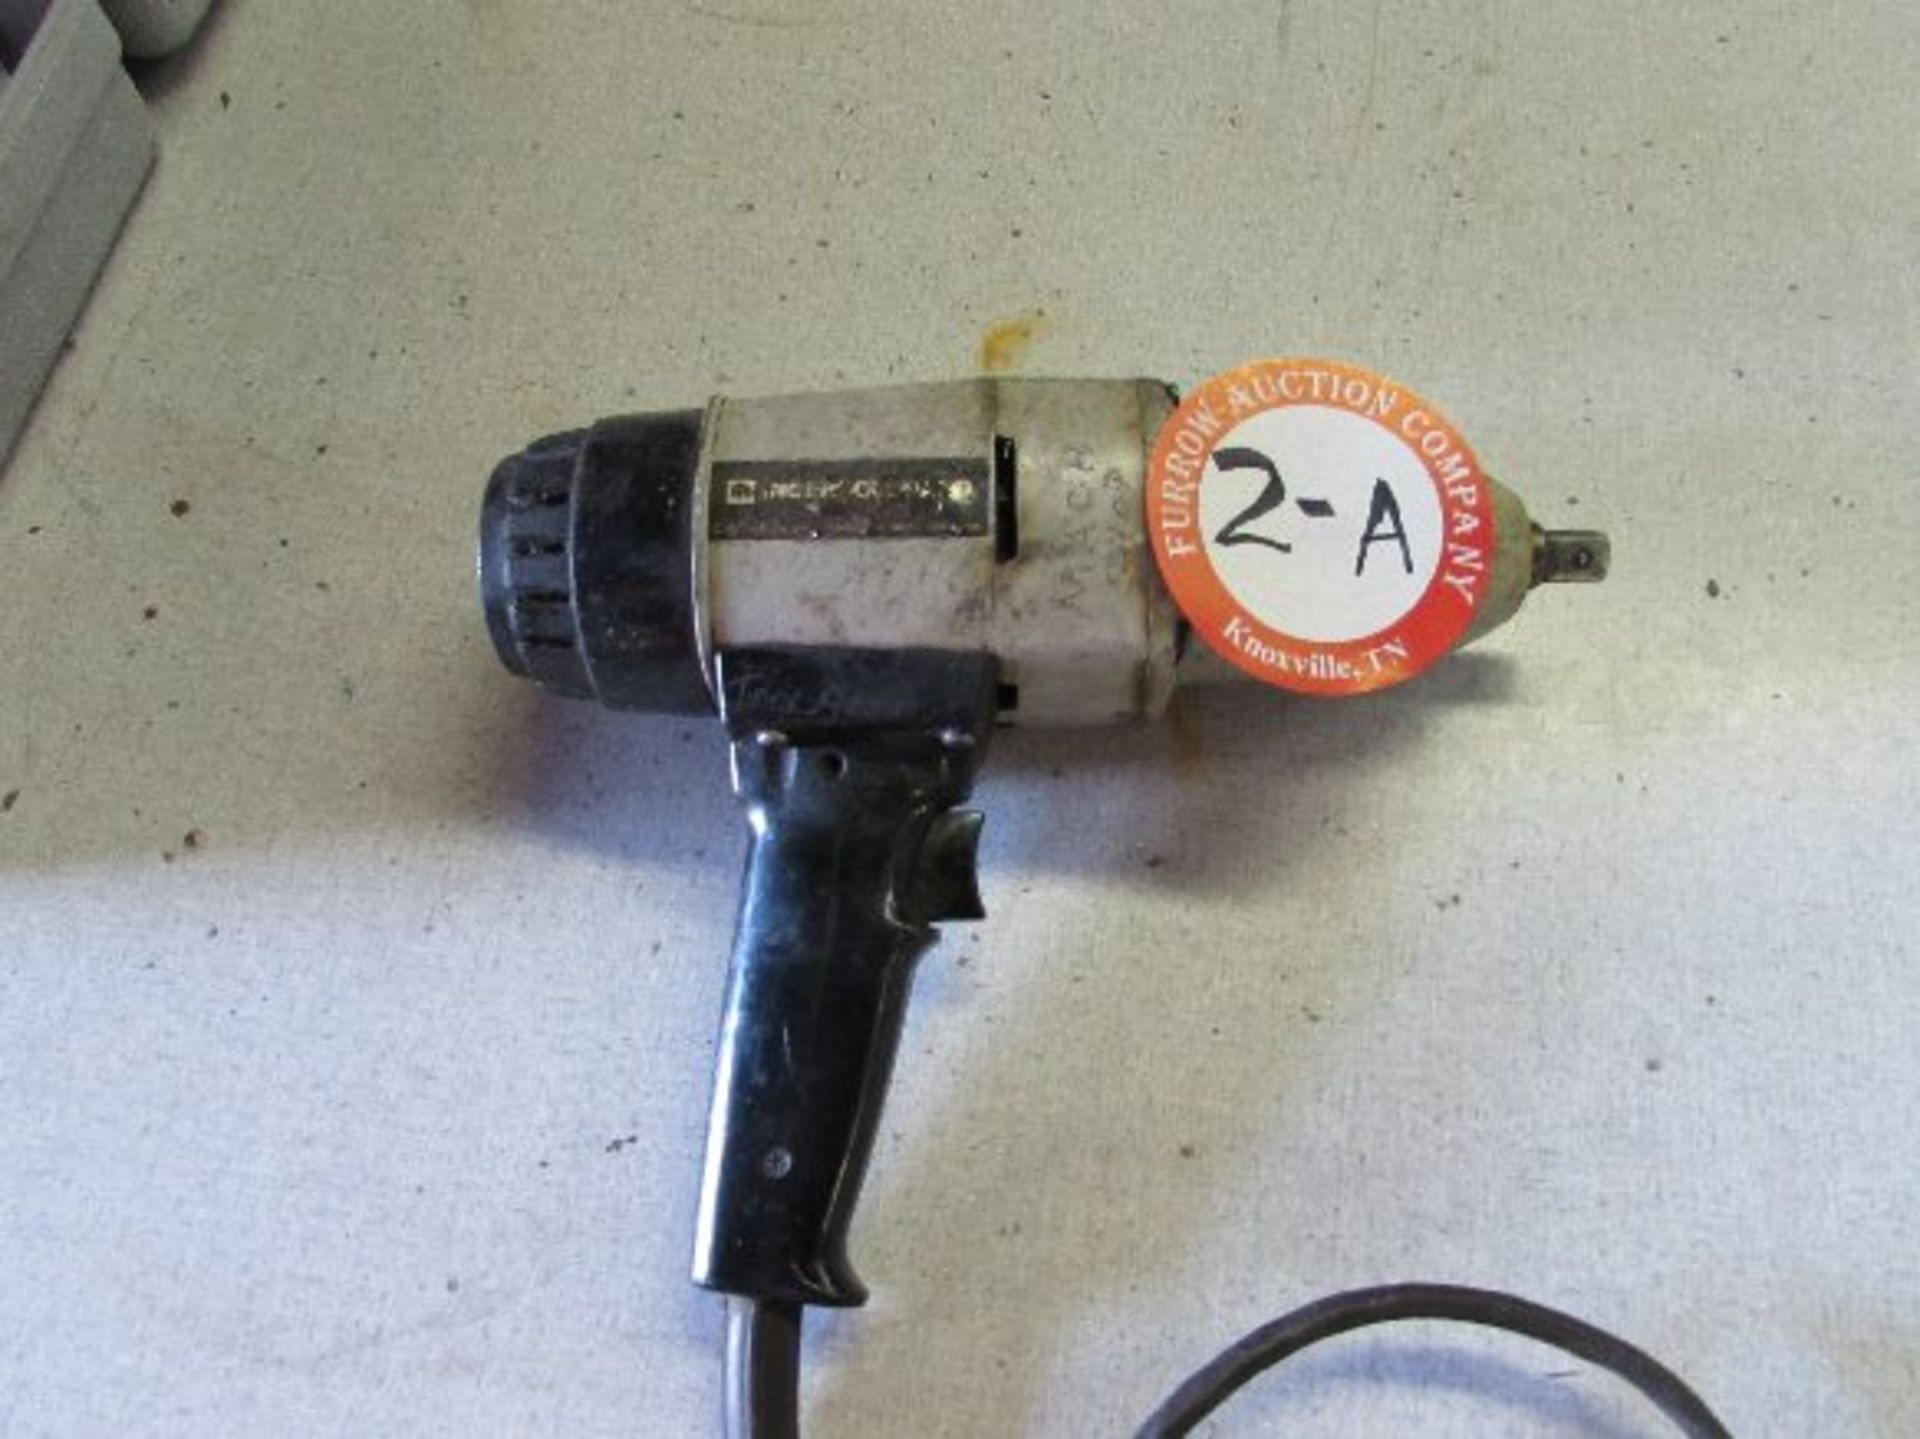 Ingersoll Rand 1/2" Drive Electric Impact Wrench